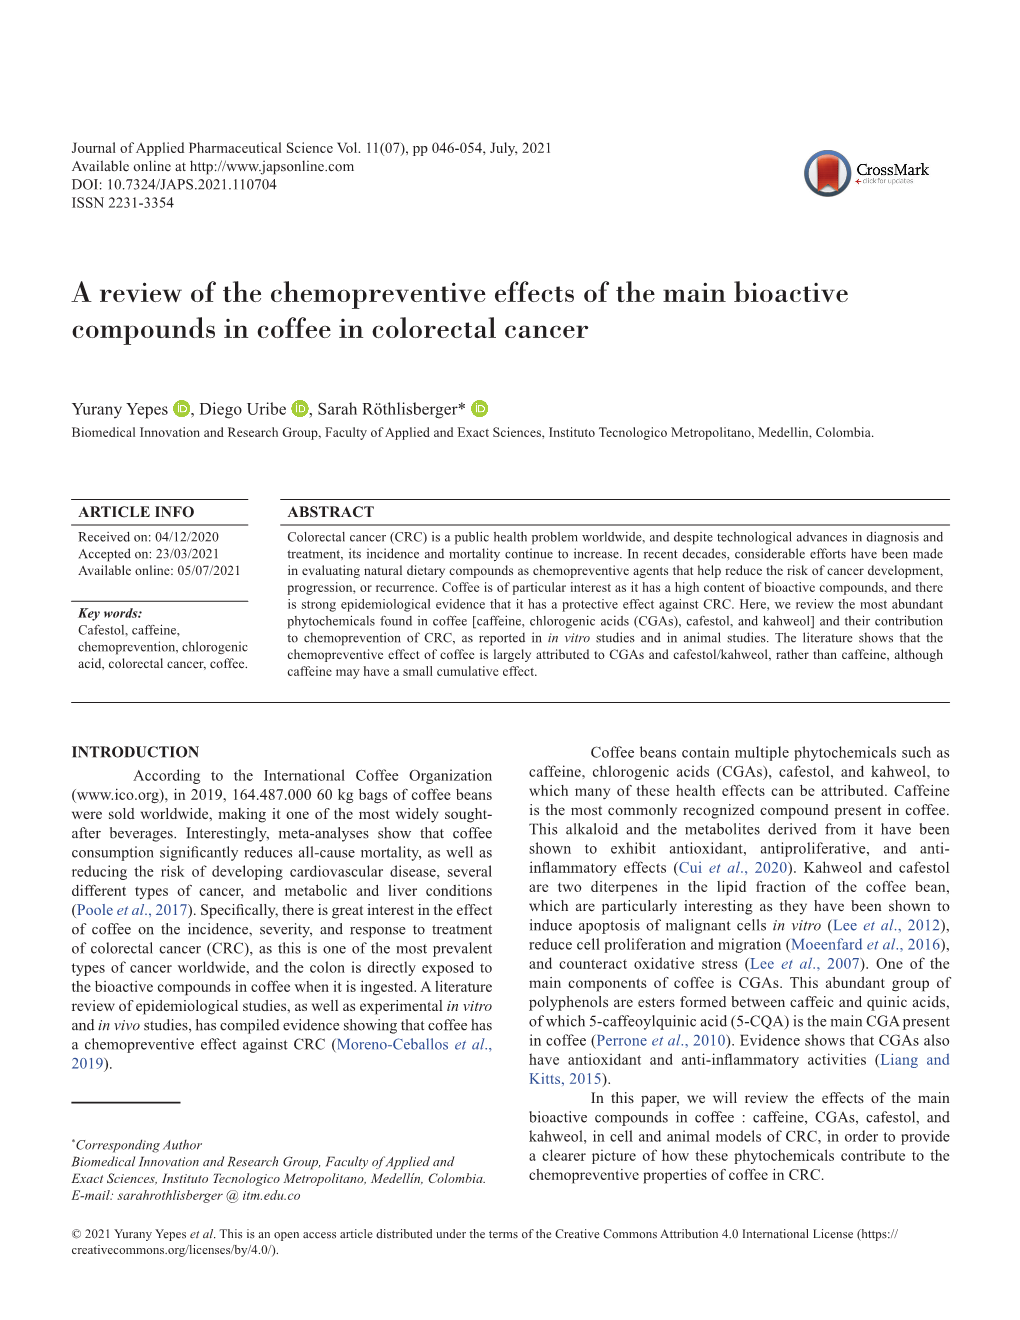 A Review of the Chemopreventive Effects of the Main Bioactive Compounds in Coffee in Colorectal Cancer